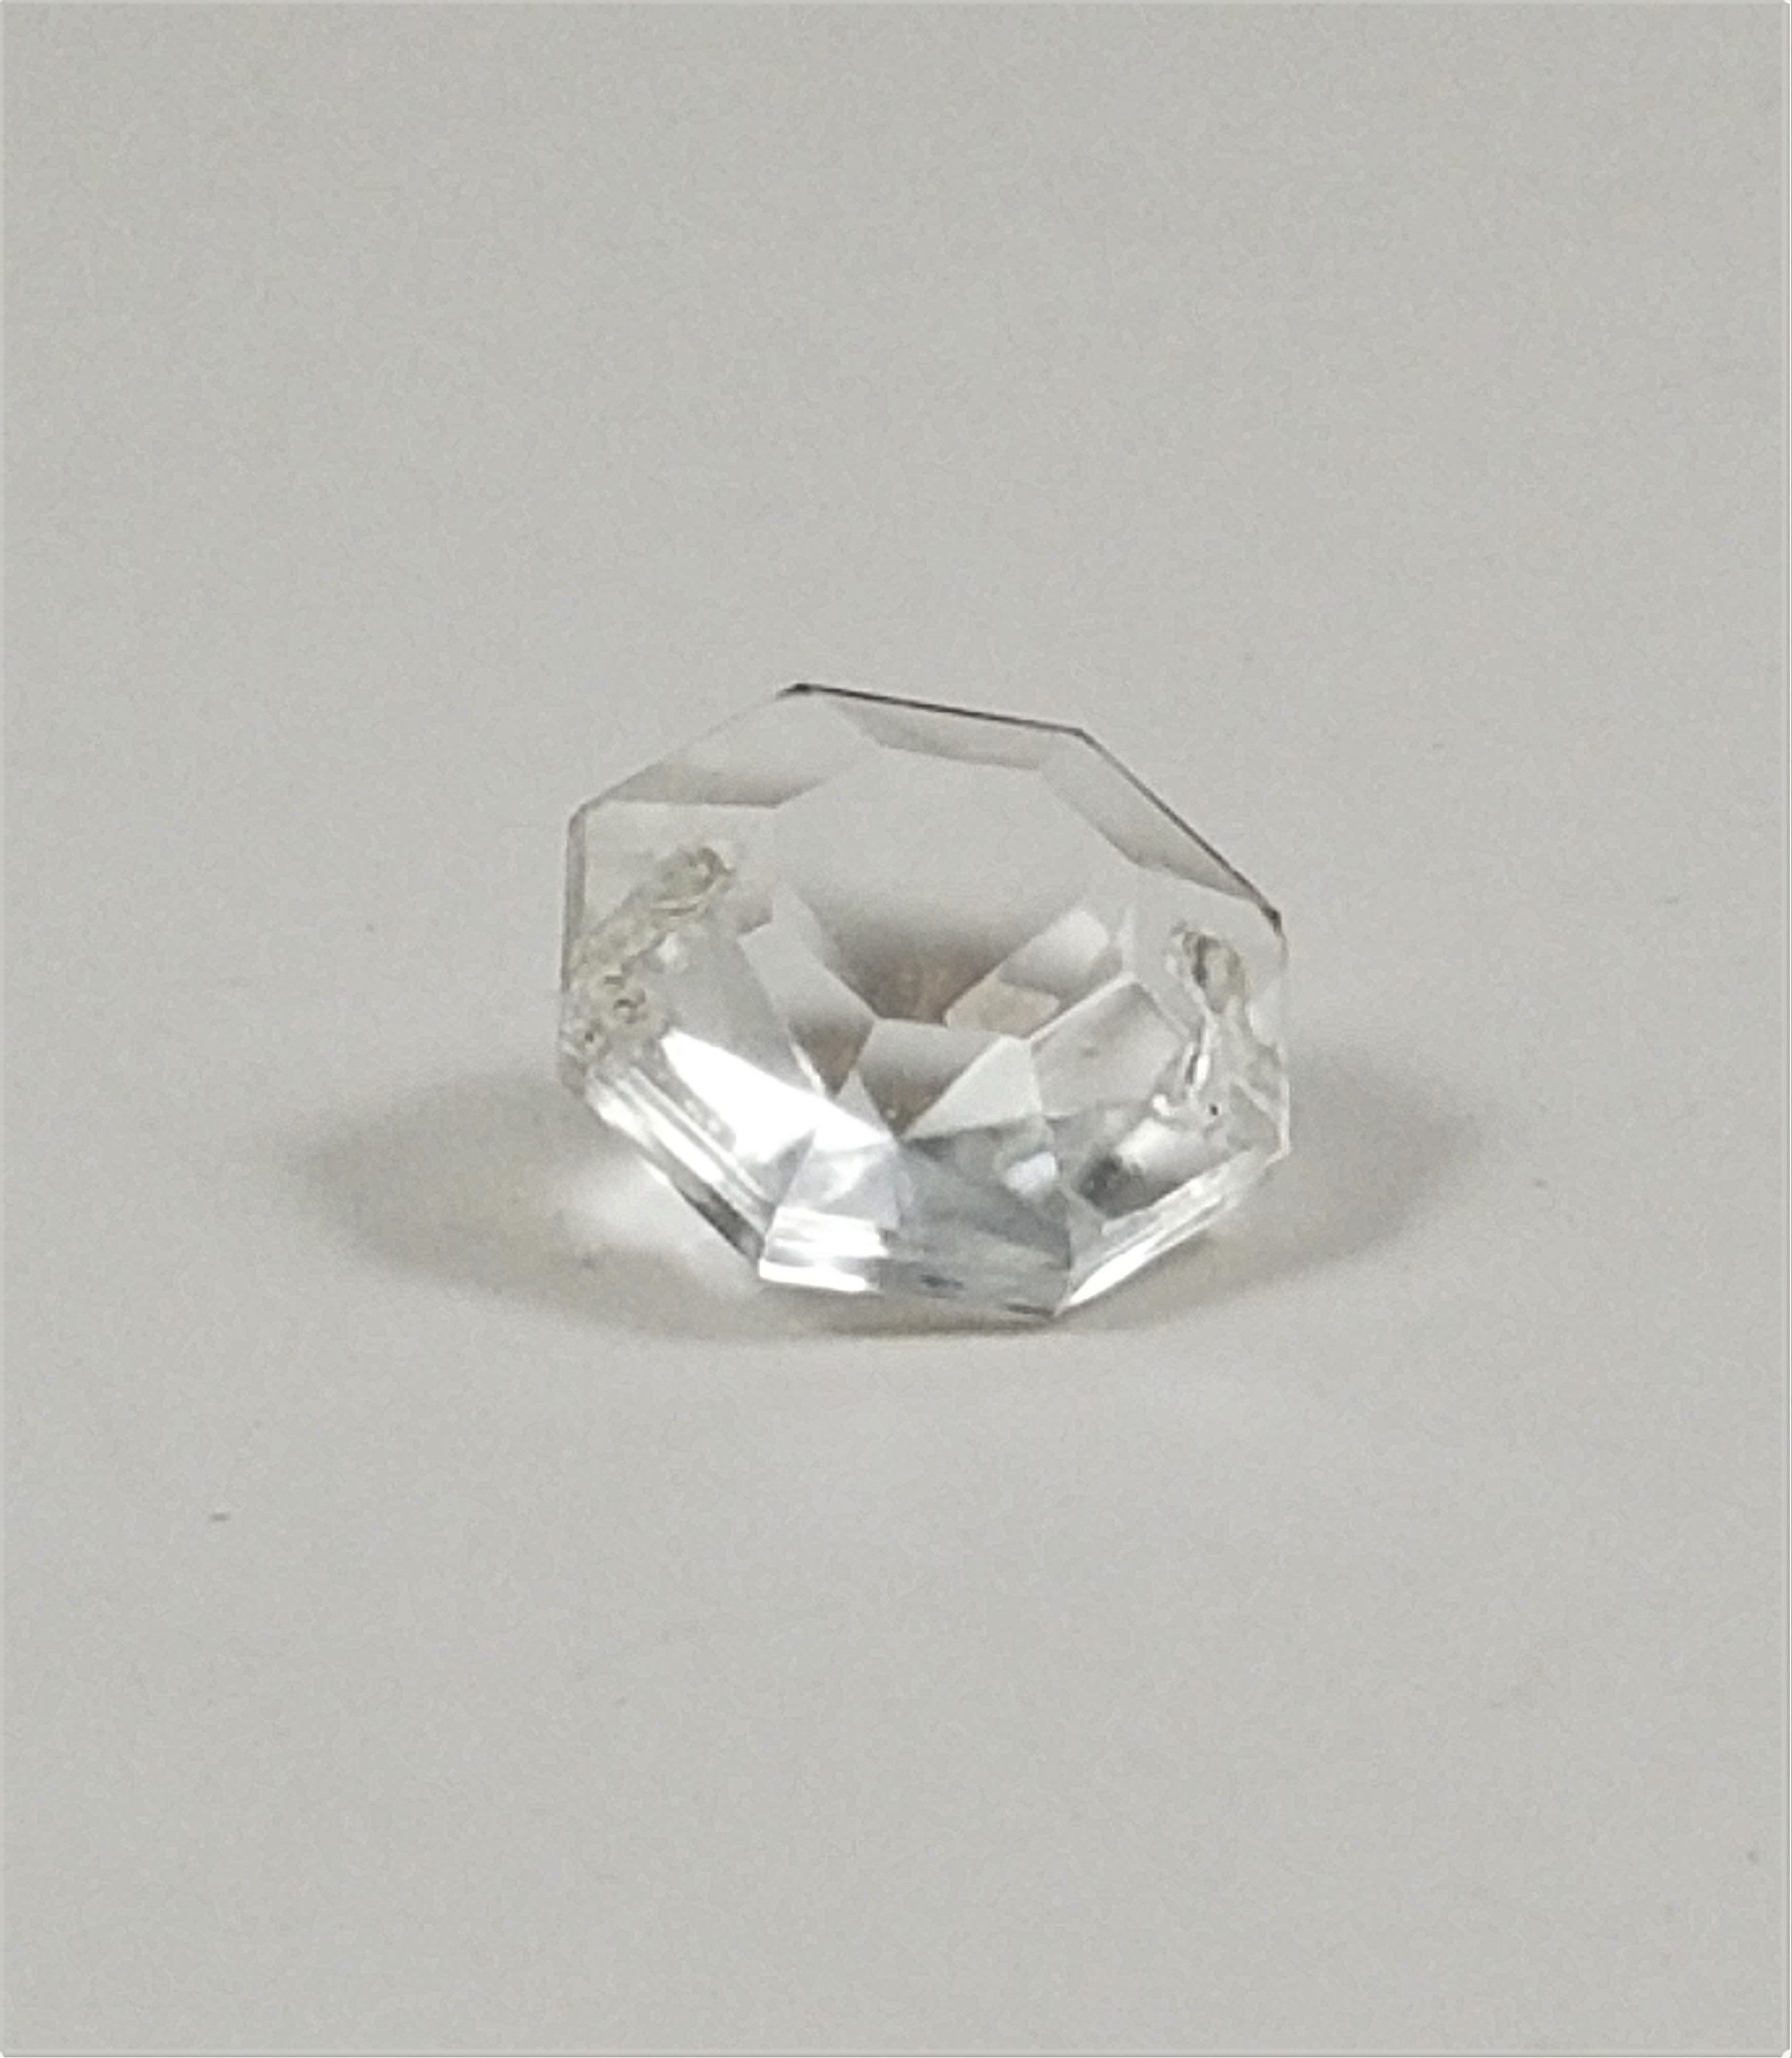 Octagonal Crystal Jewel with side holes.